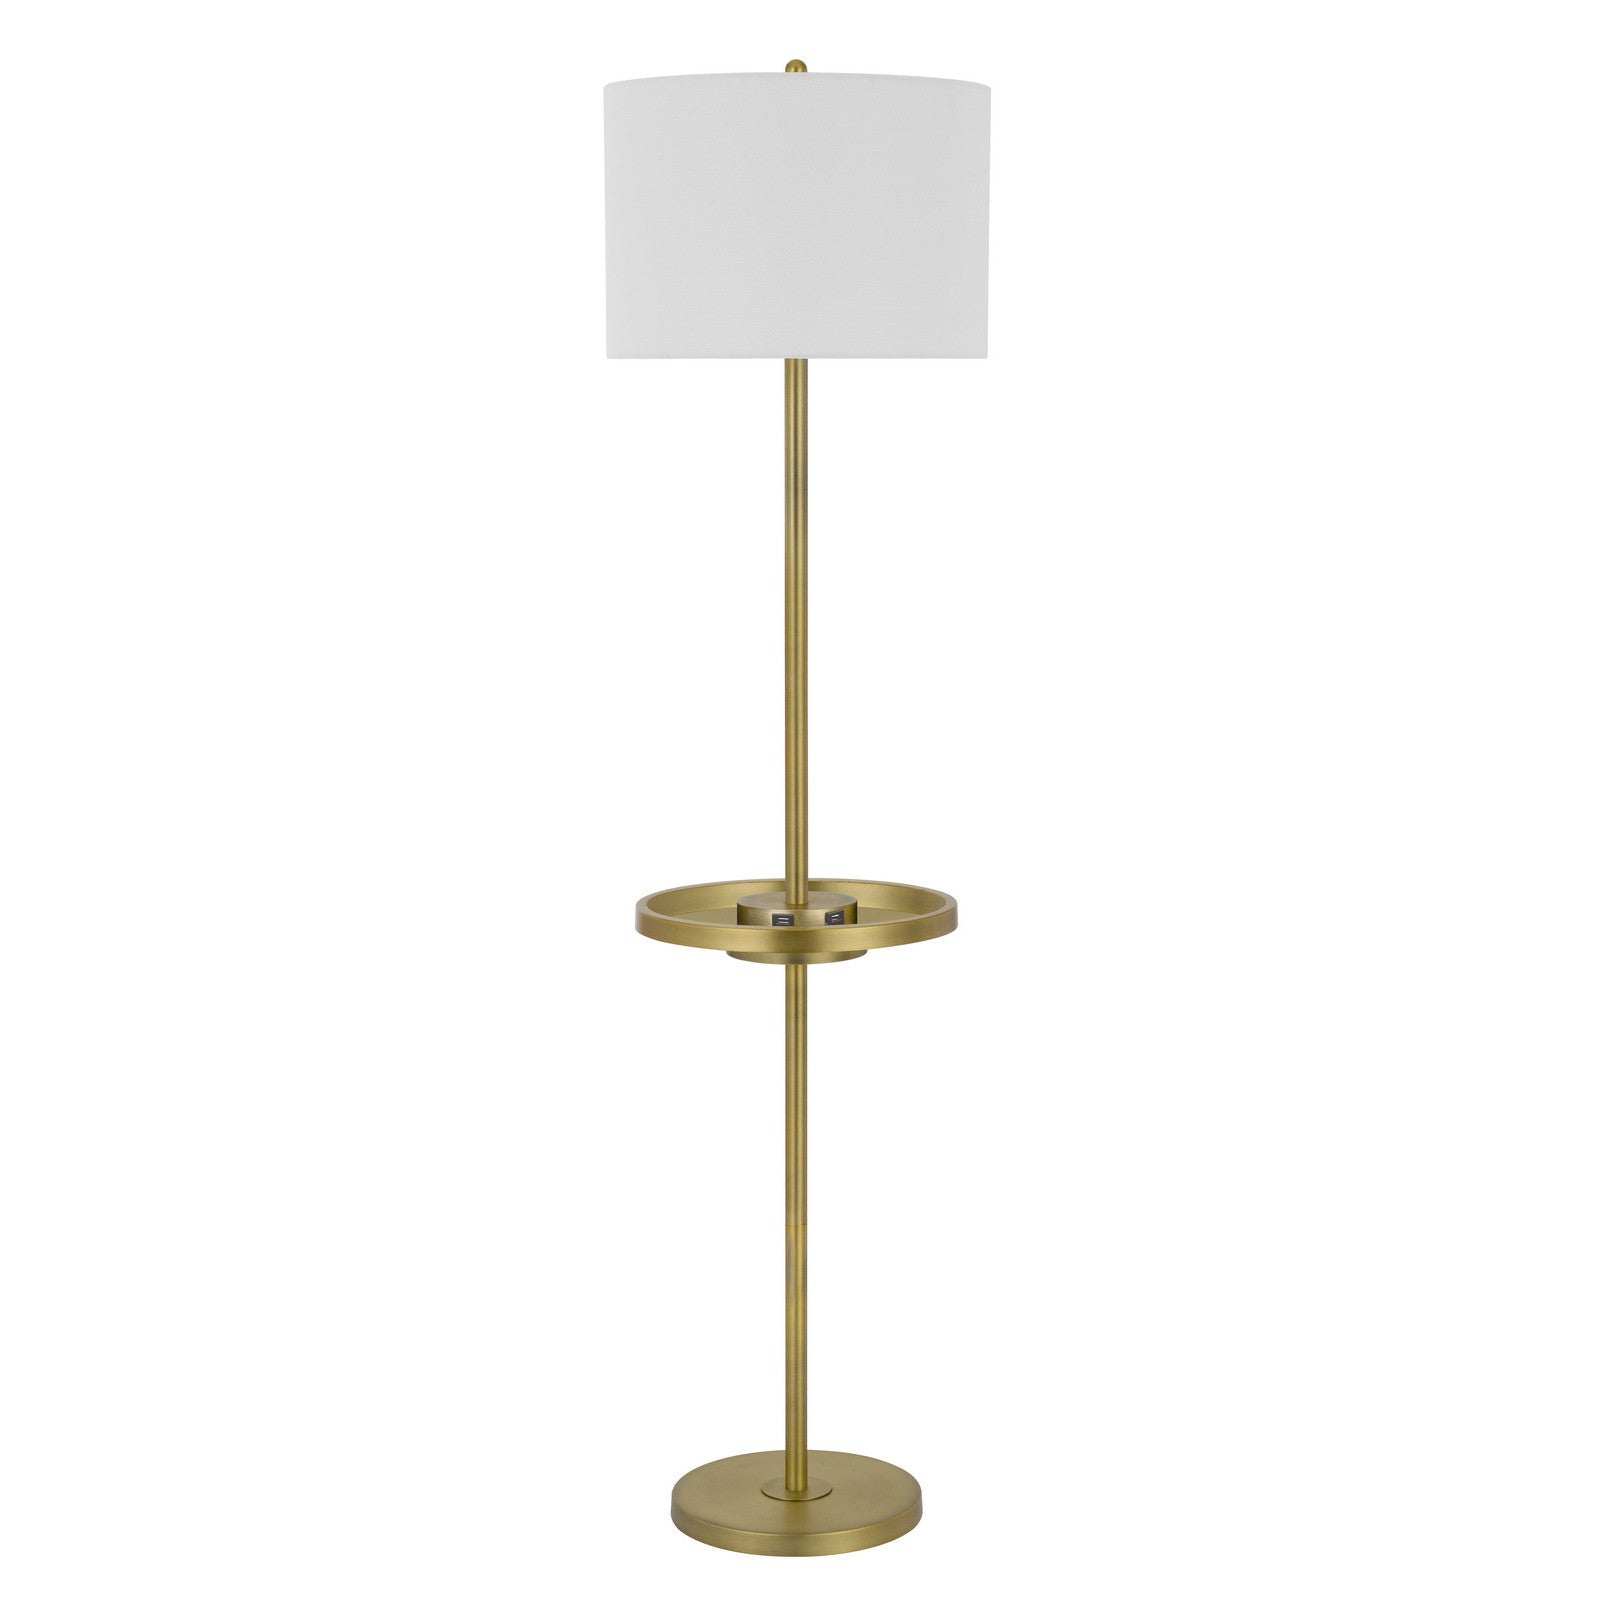 62" Nickel Tray Table Floor Lamp With White Drum Shade